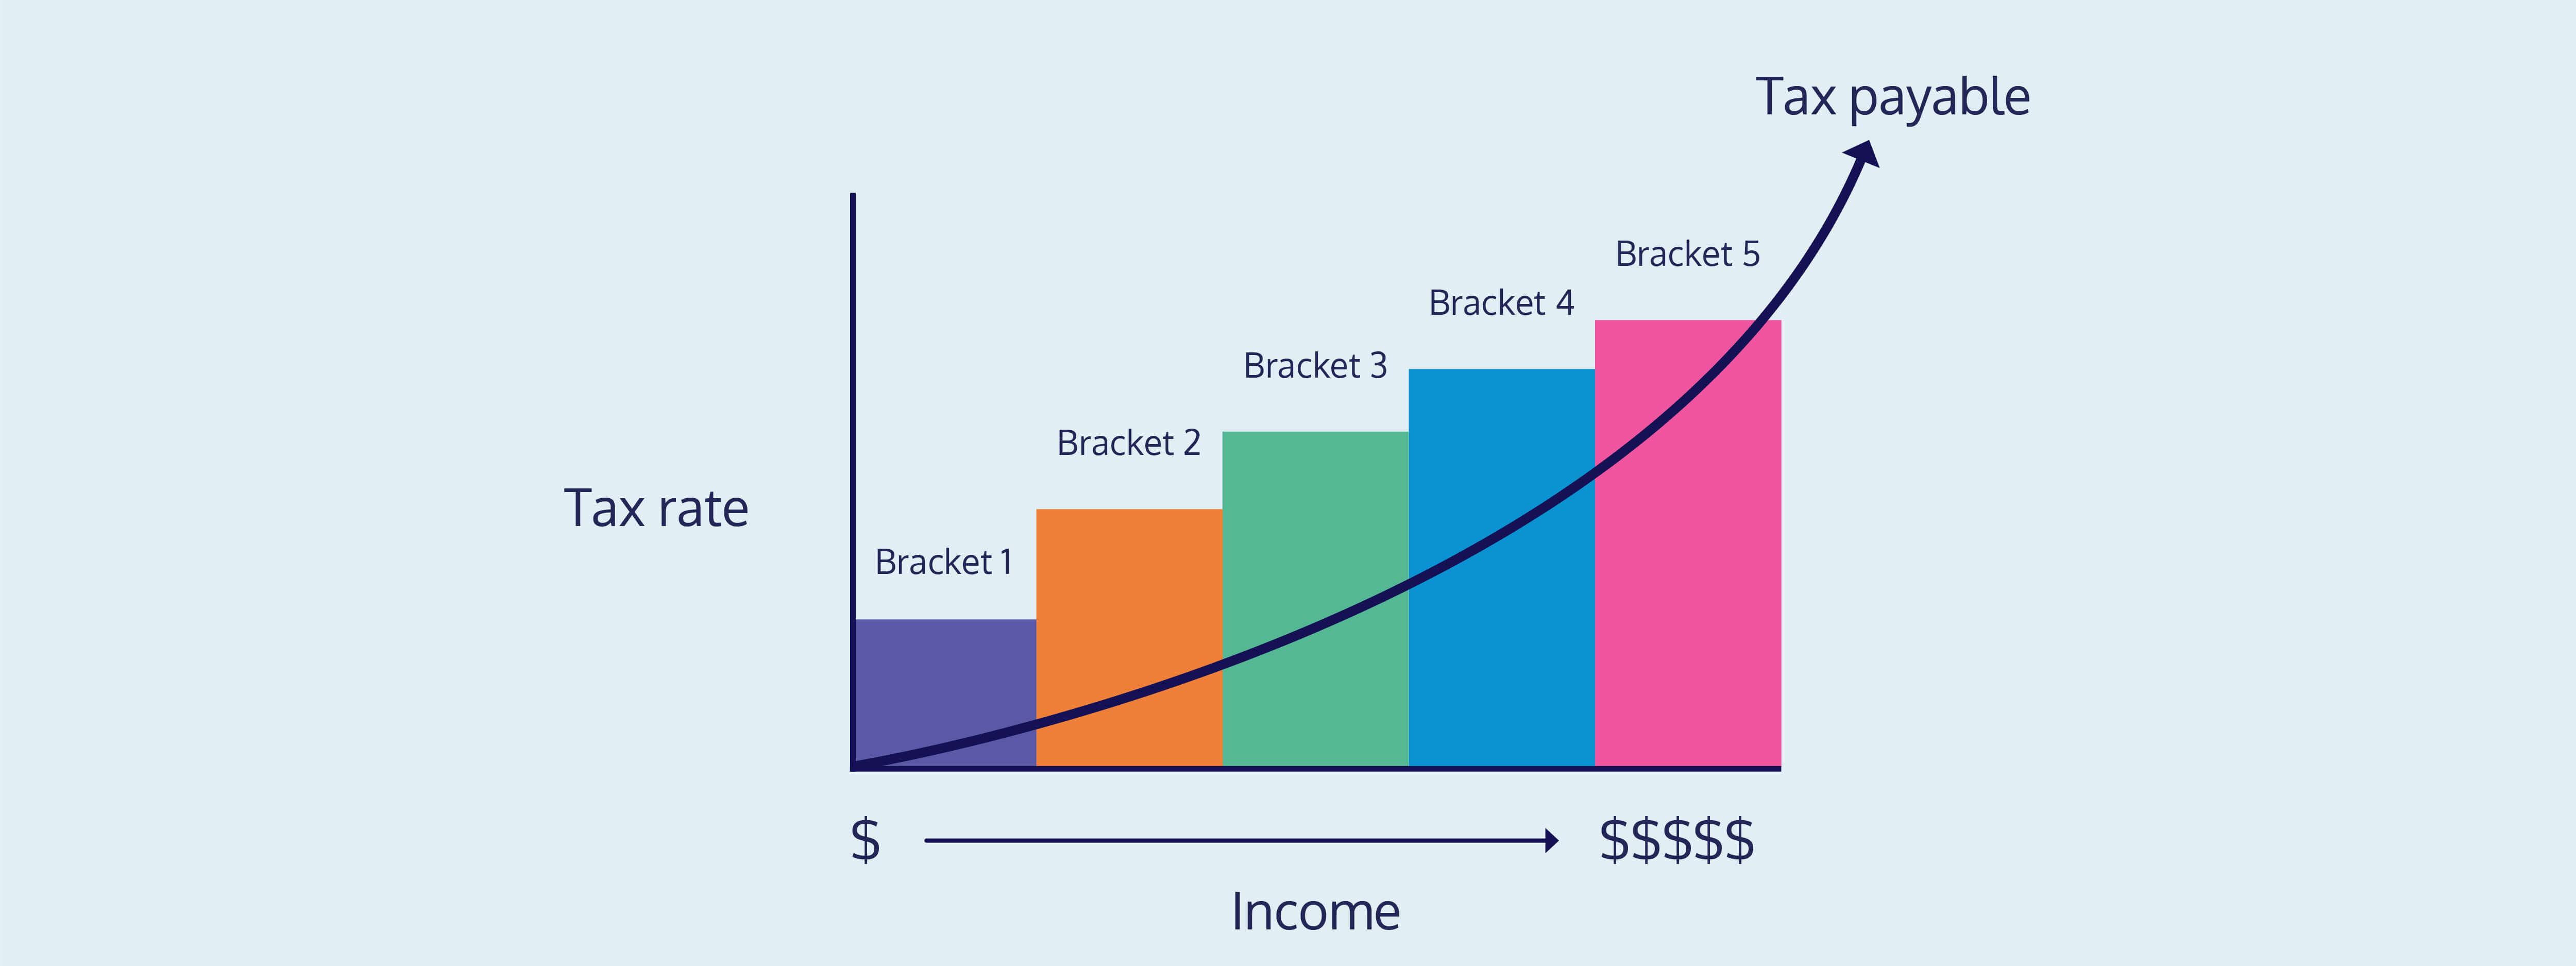 Tax rate to income graph